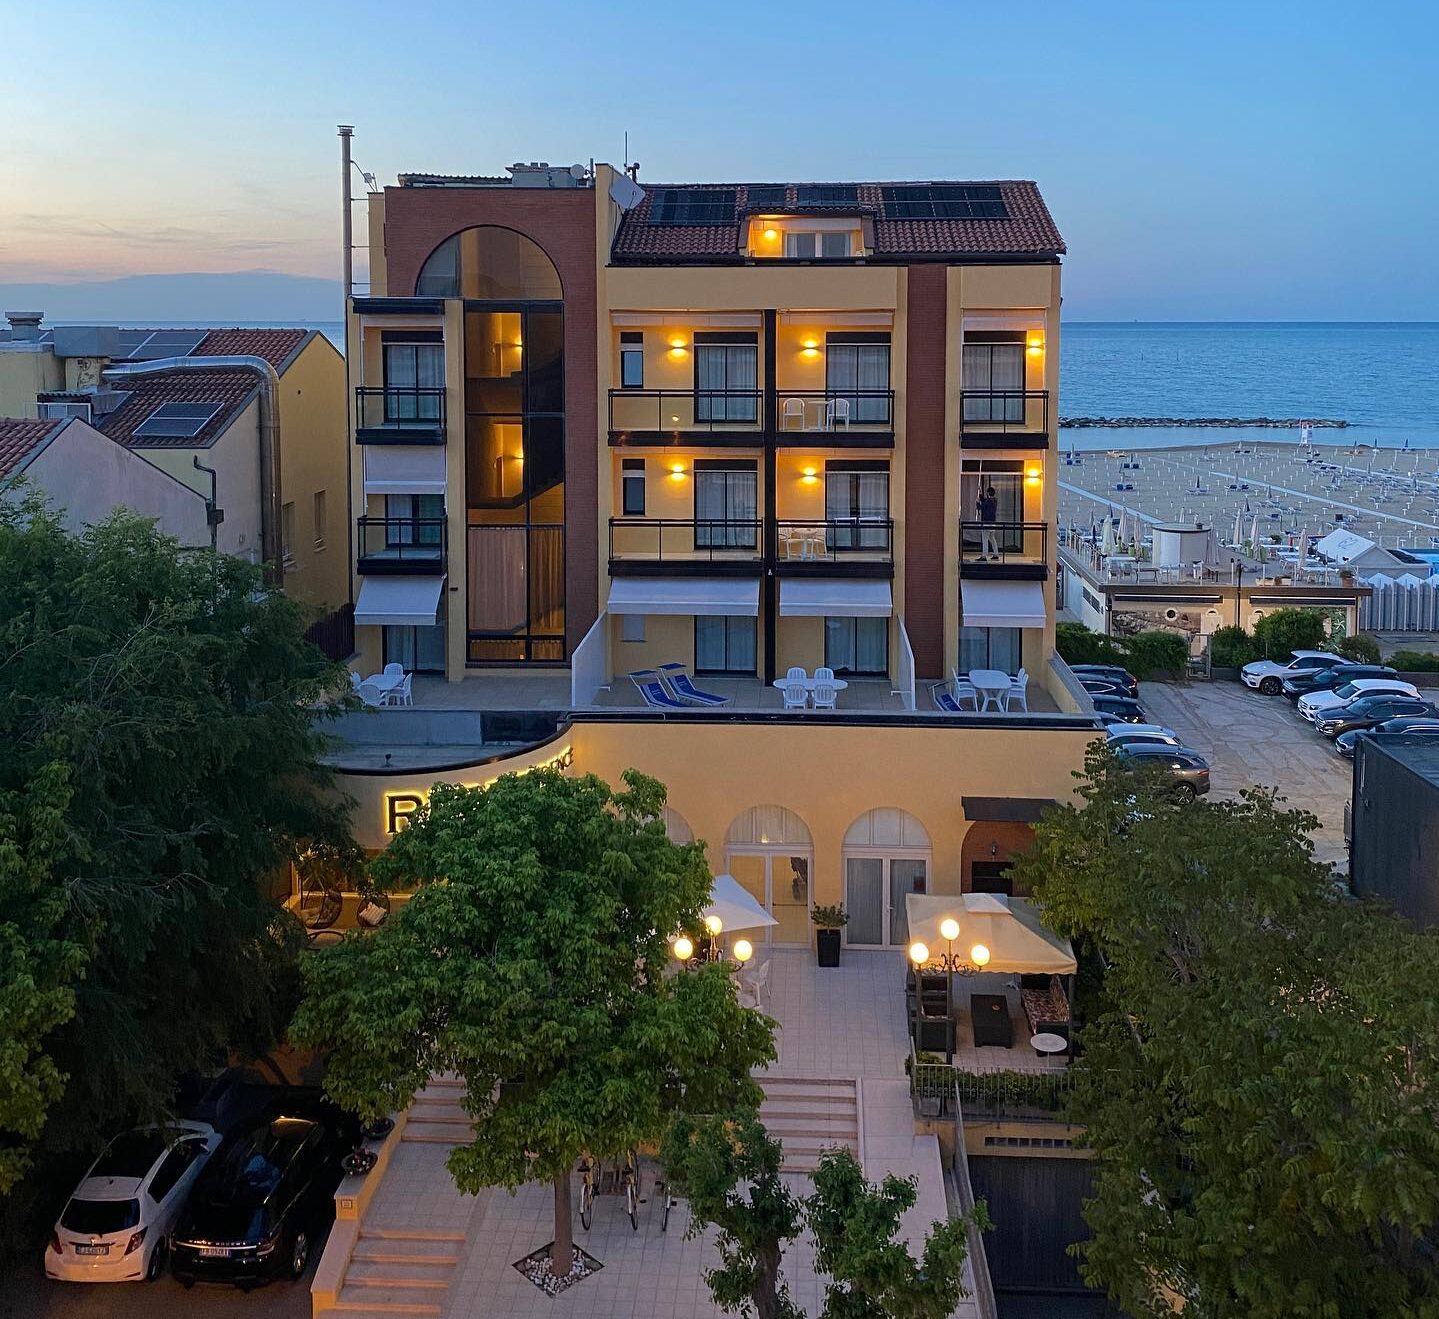 rex residence hotel cattolica